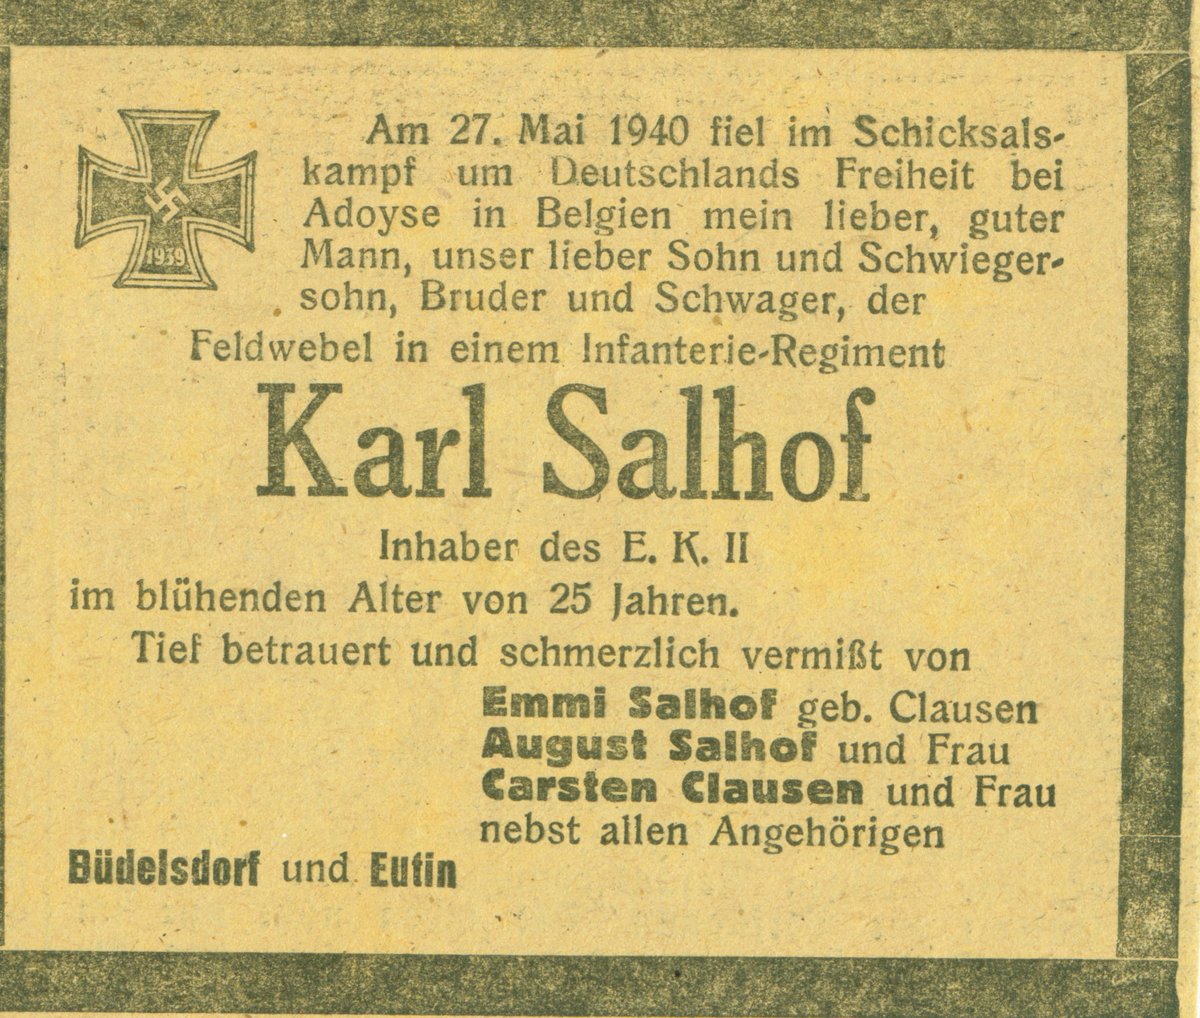  #Ypres1940: Karl Salhof was one of those killed in the fighting in Flanders in May 1940. I rescued his papers and letters from a junk shop many years ago. He'd previously fought in Poland and was awarded a EK2.